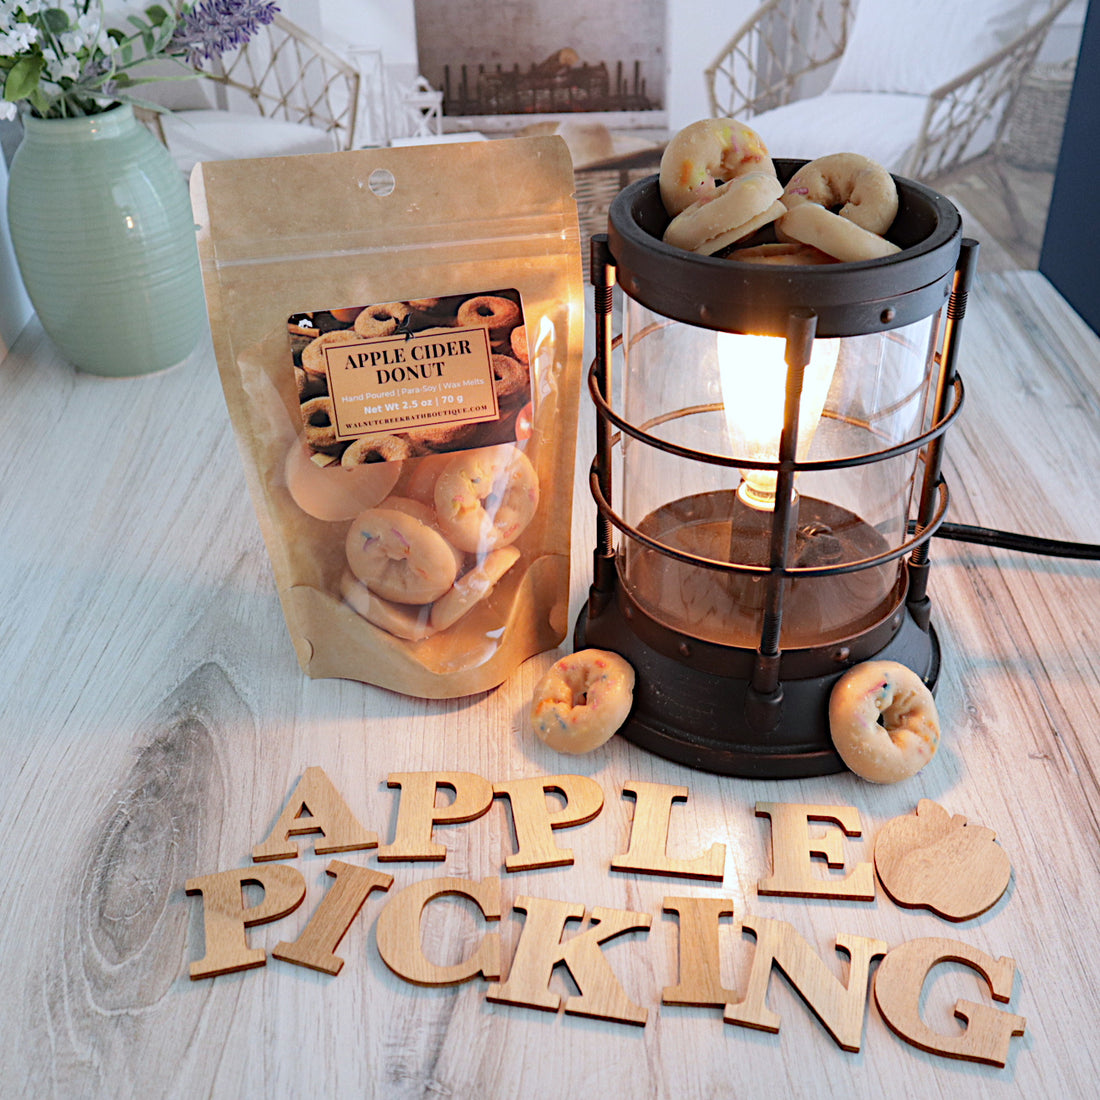 apple cider donut wax melts in a bag is standing next to a lit wax melter with the donut wax melt shapes in the melter cup. there are a couple of donut wax melts on the bottom of the burner. in front of the bag and the burner are wooden letter spelling out &quot;apple picking&quot;.  this is all sitting on a washed out wooden base with a couple of chairs in the background next to a fireplace